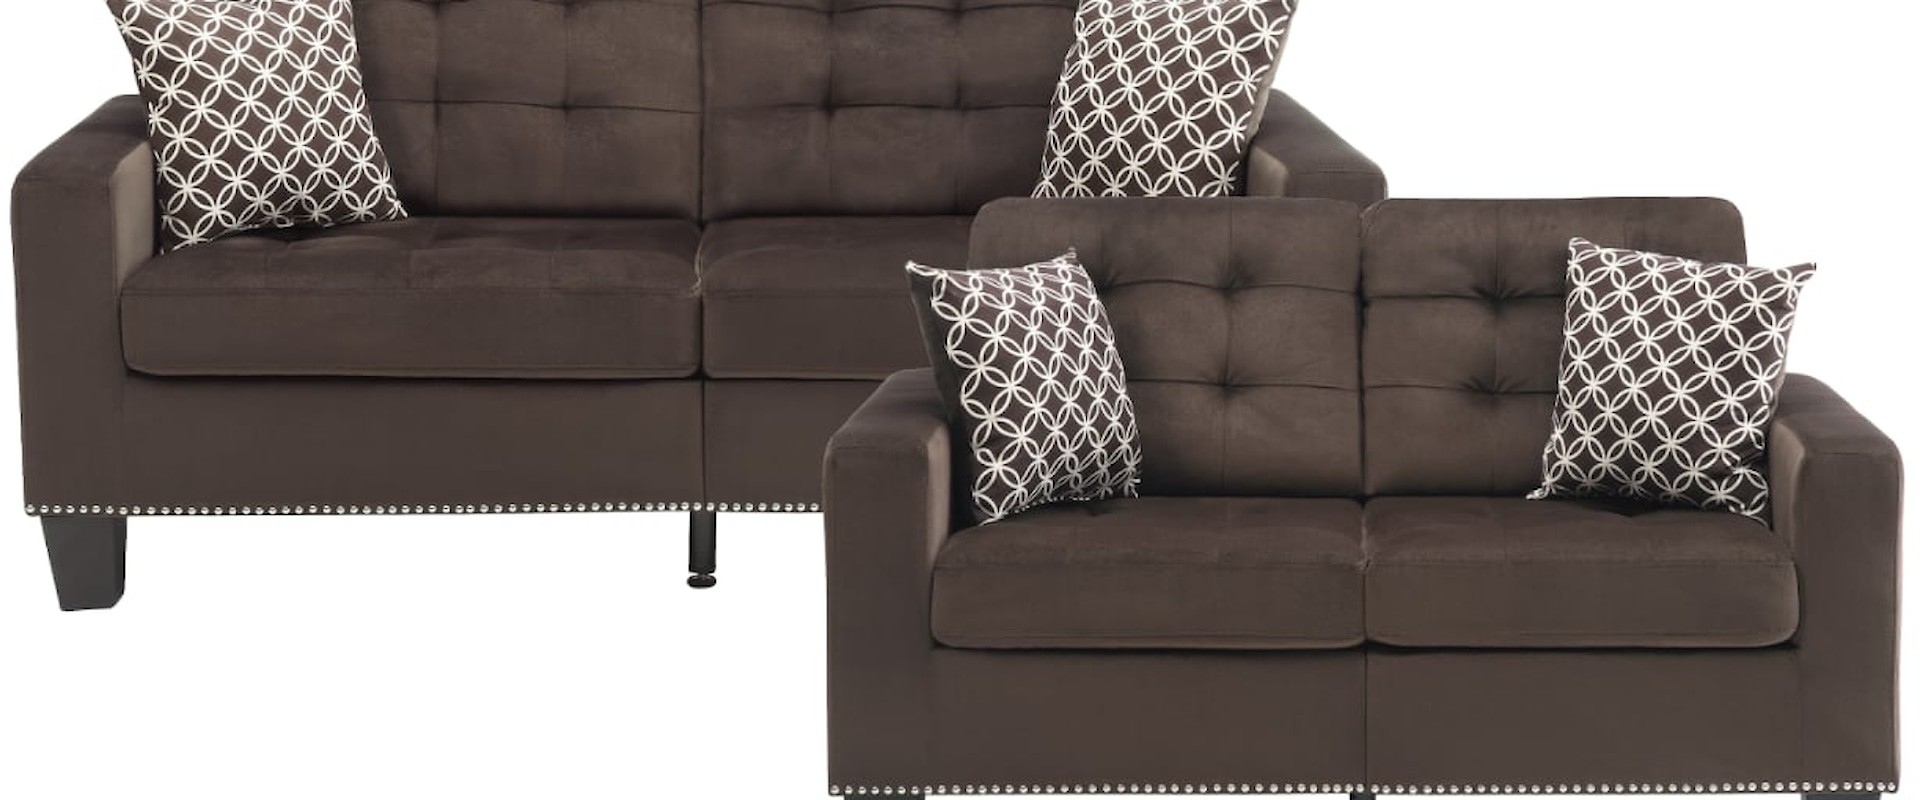 Transitional 2-Piece Living Room Set with Button Tufting